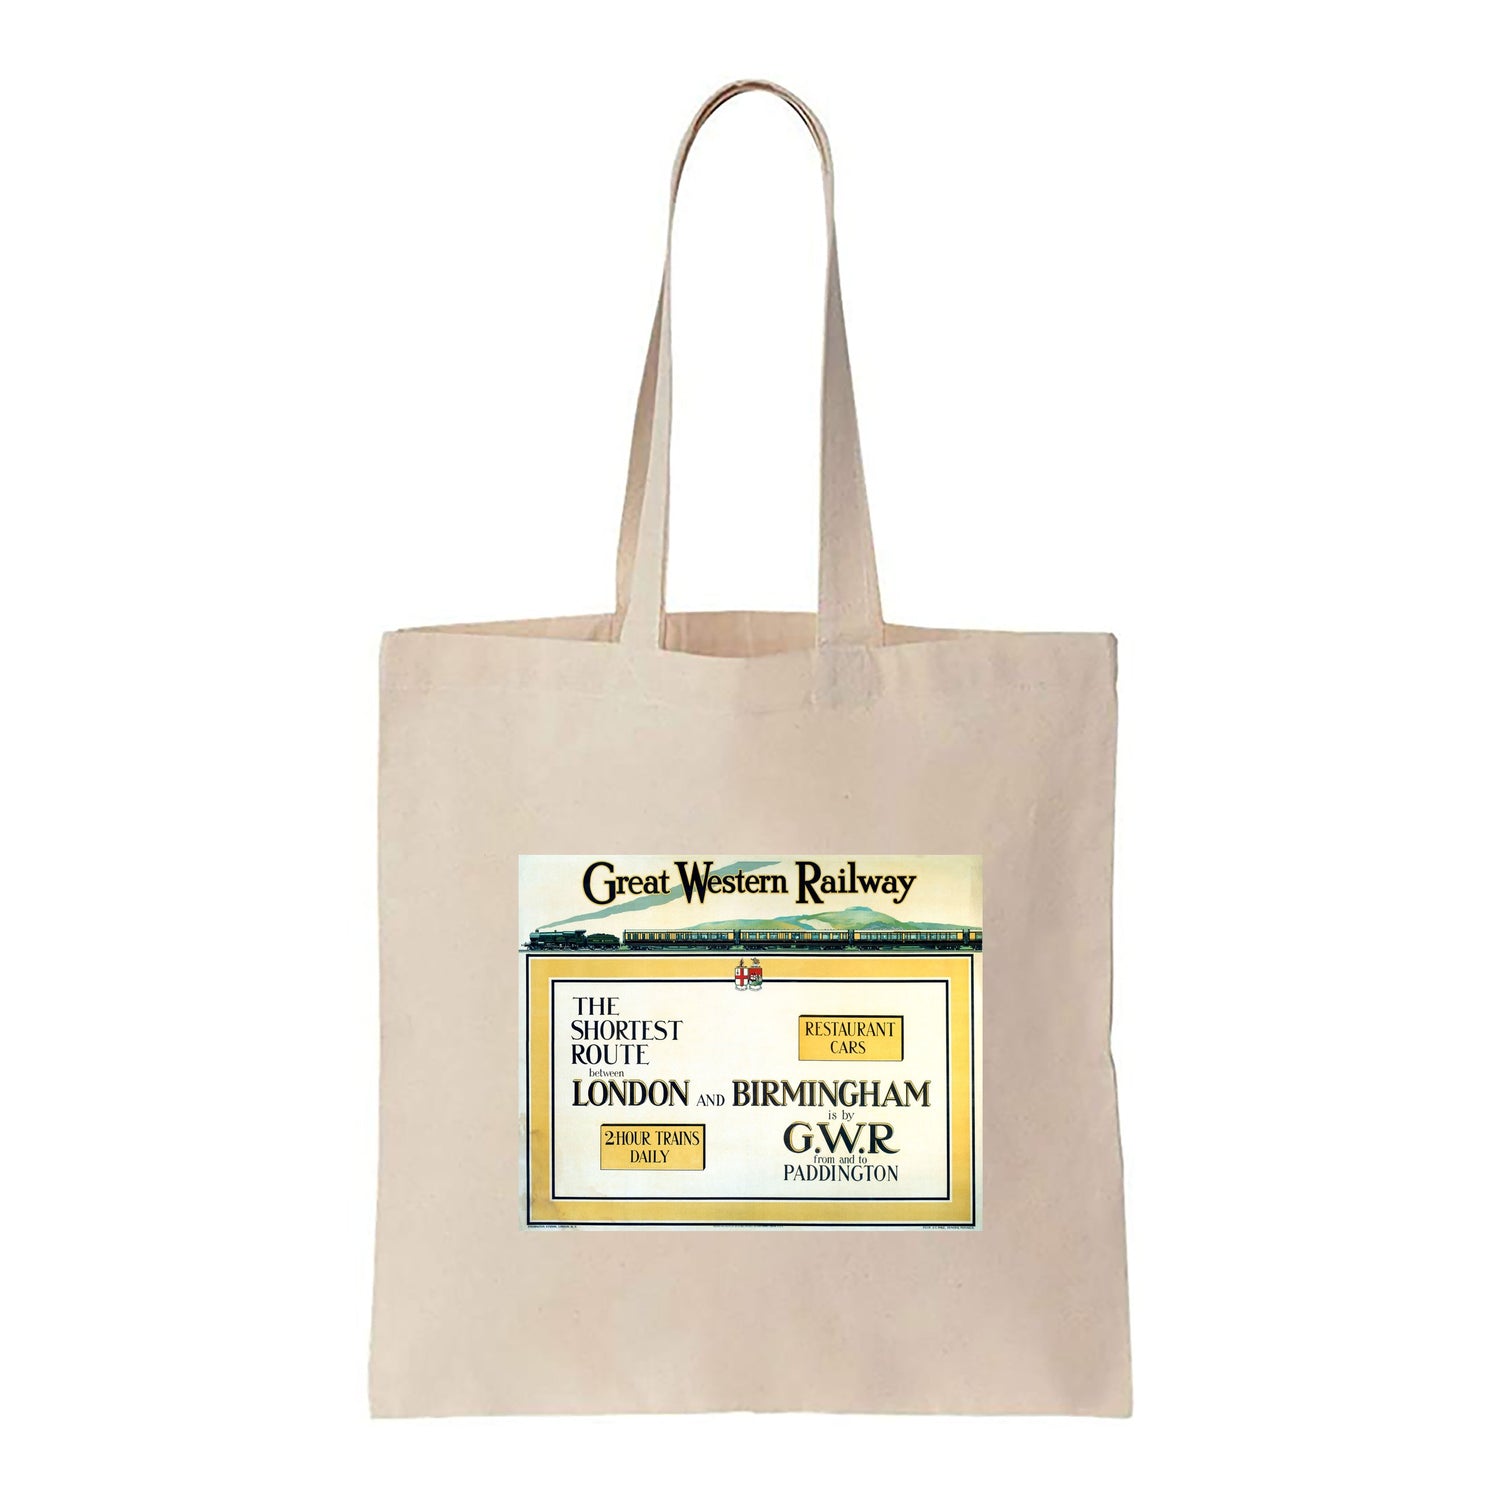 The Shortest Route - London to Birmingham GWR - Canvas Tote Bag